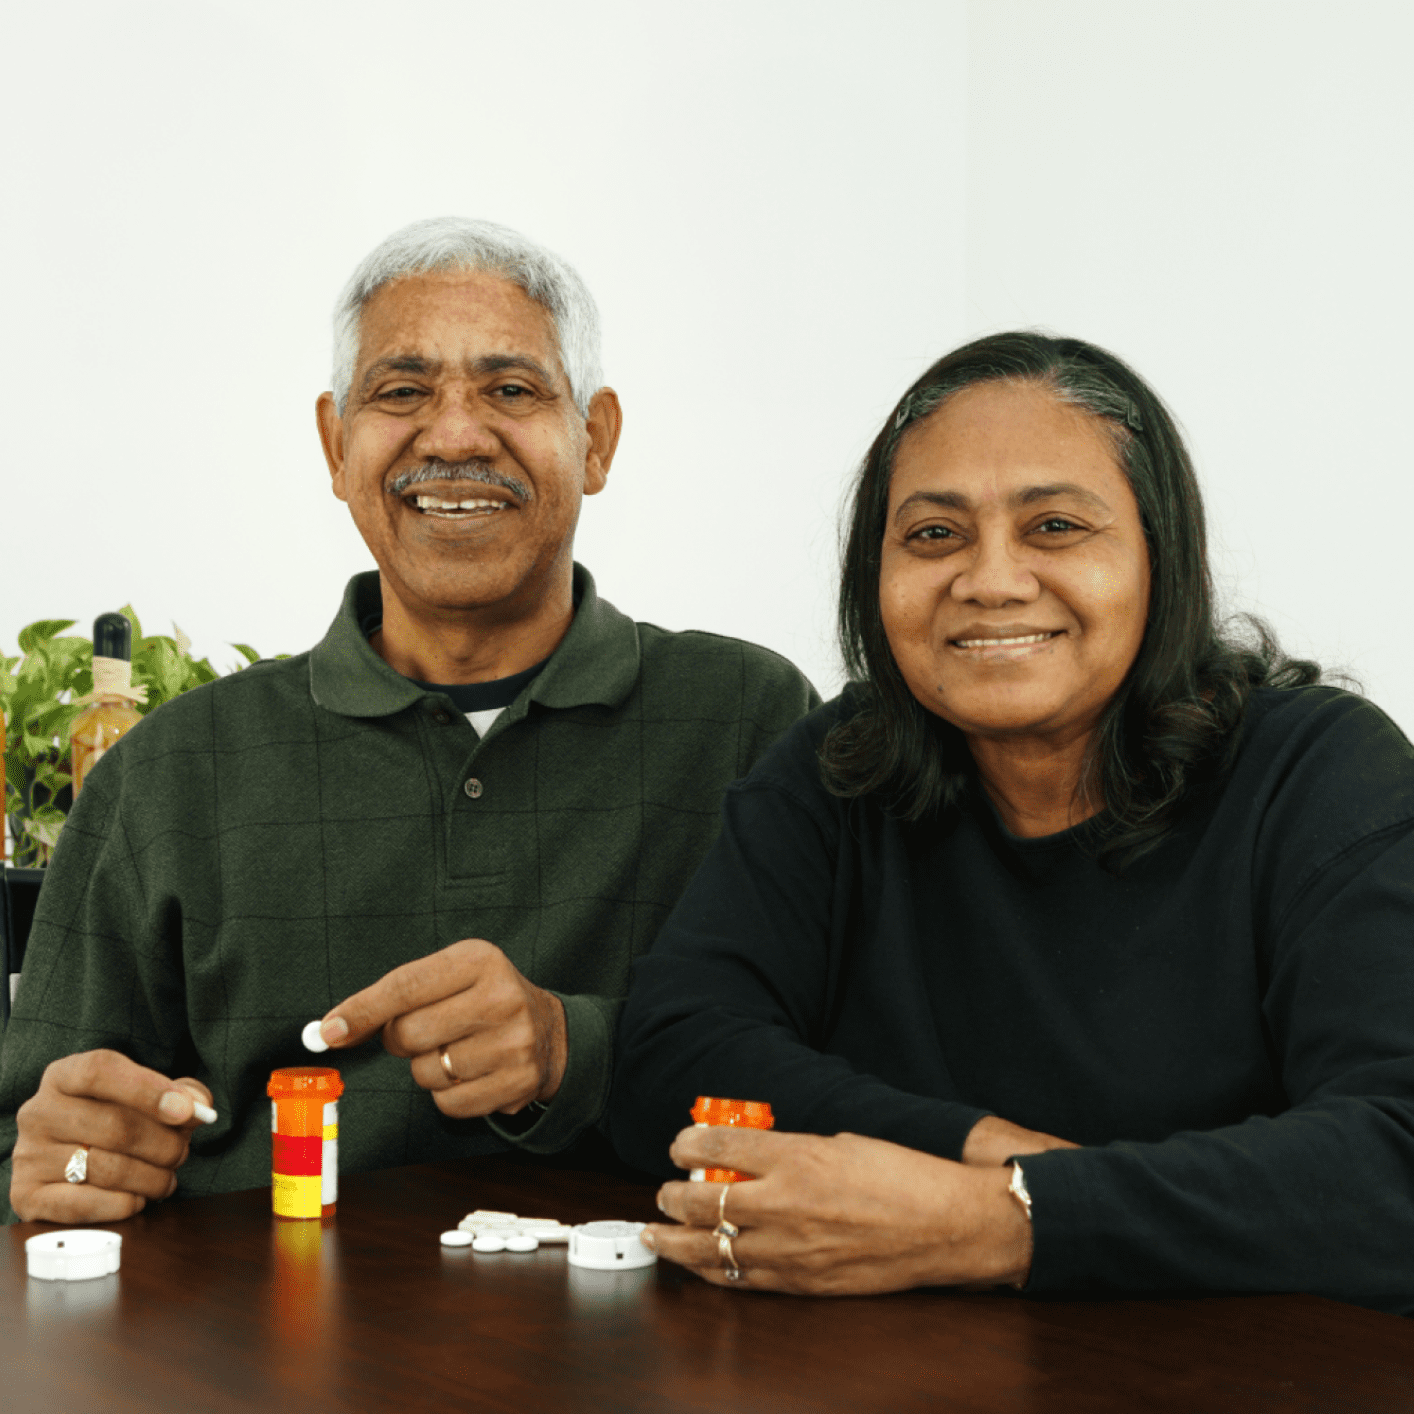 A couple holding their medication bottles, smiling at the camera.